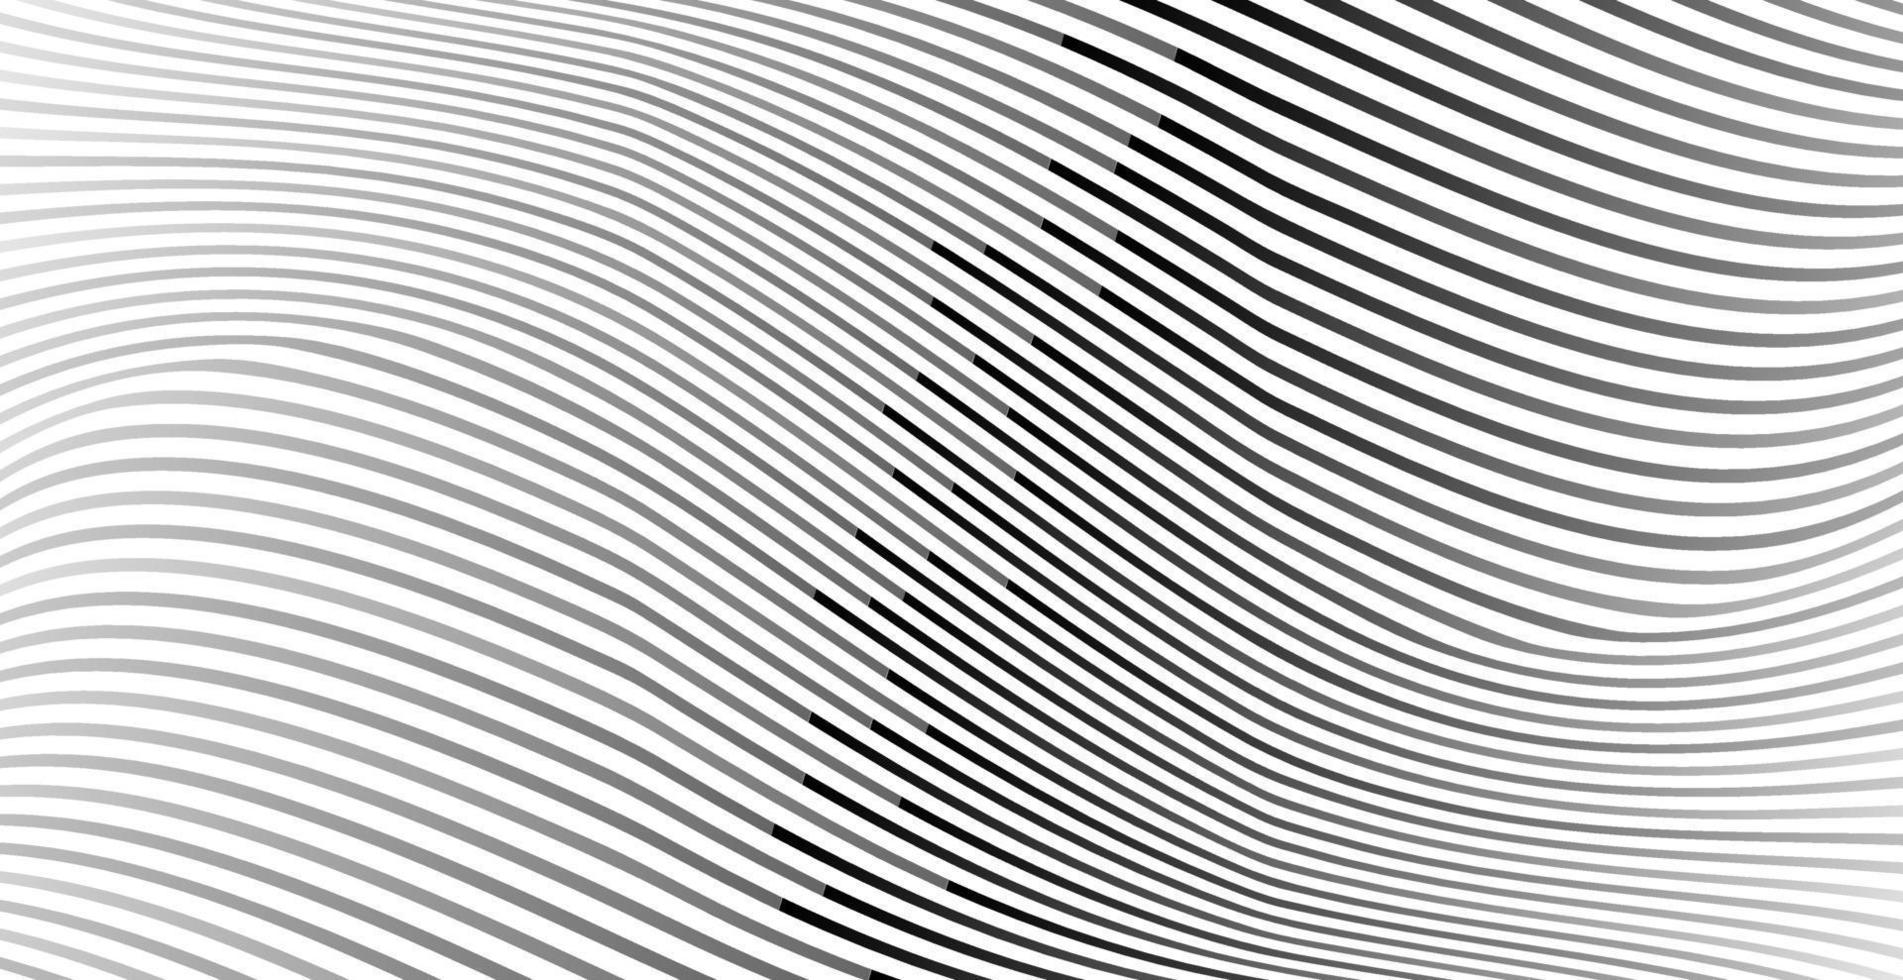 Abstract stripe background, vector template for your ideas, monochromatic lines texture, waved lines texture